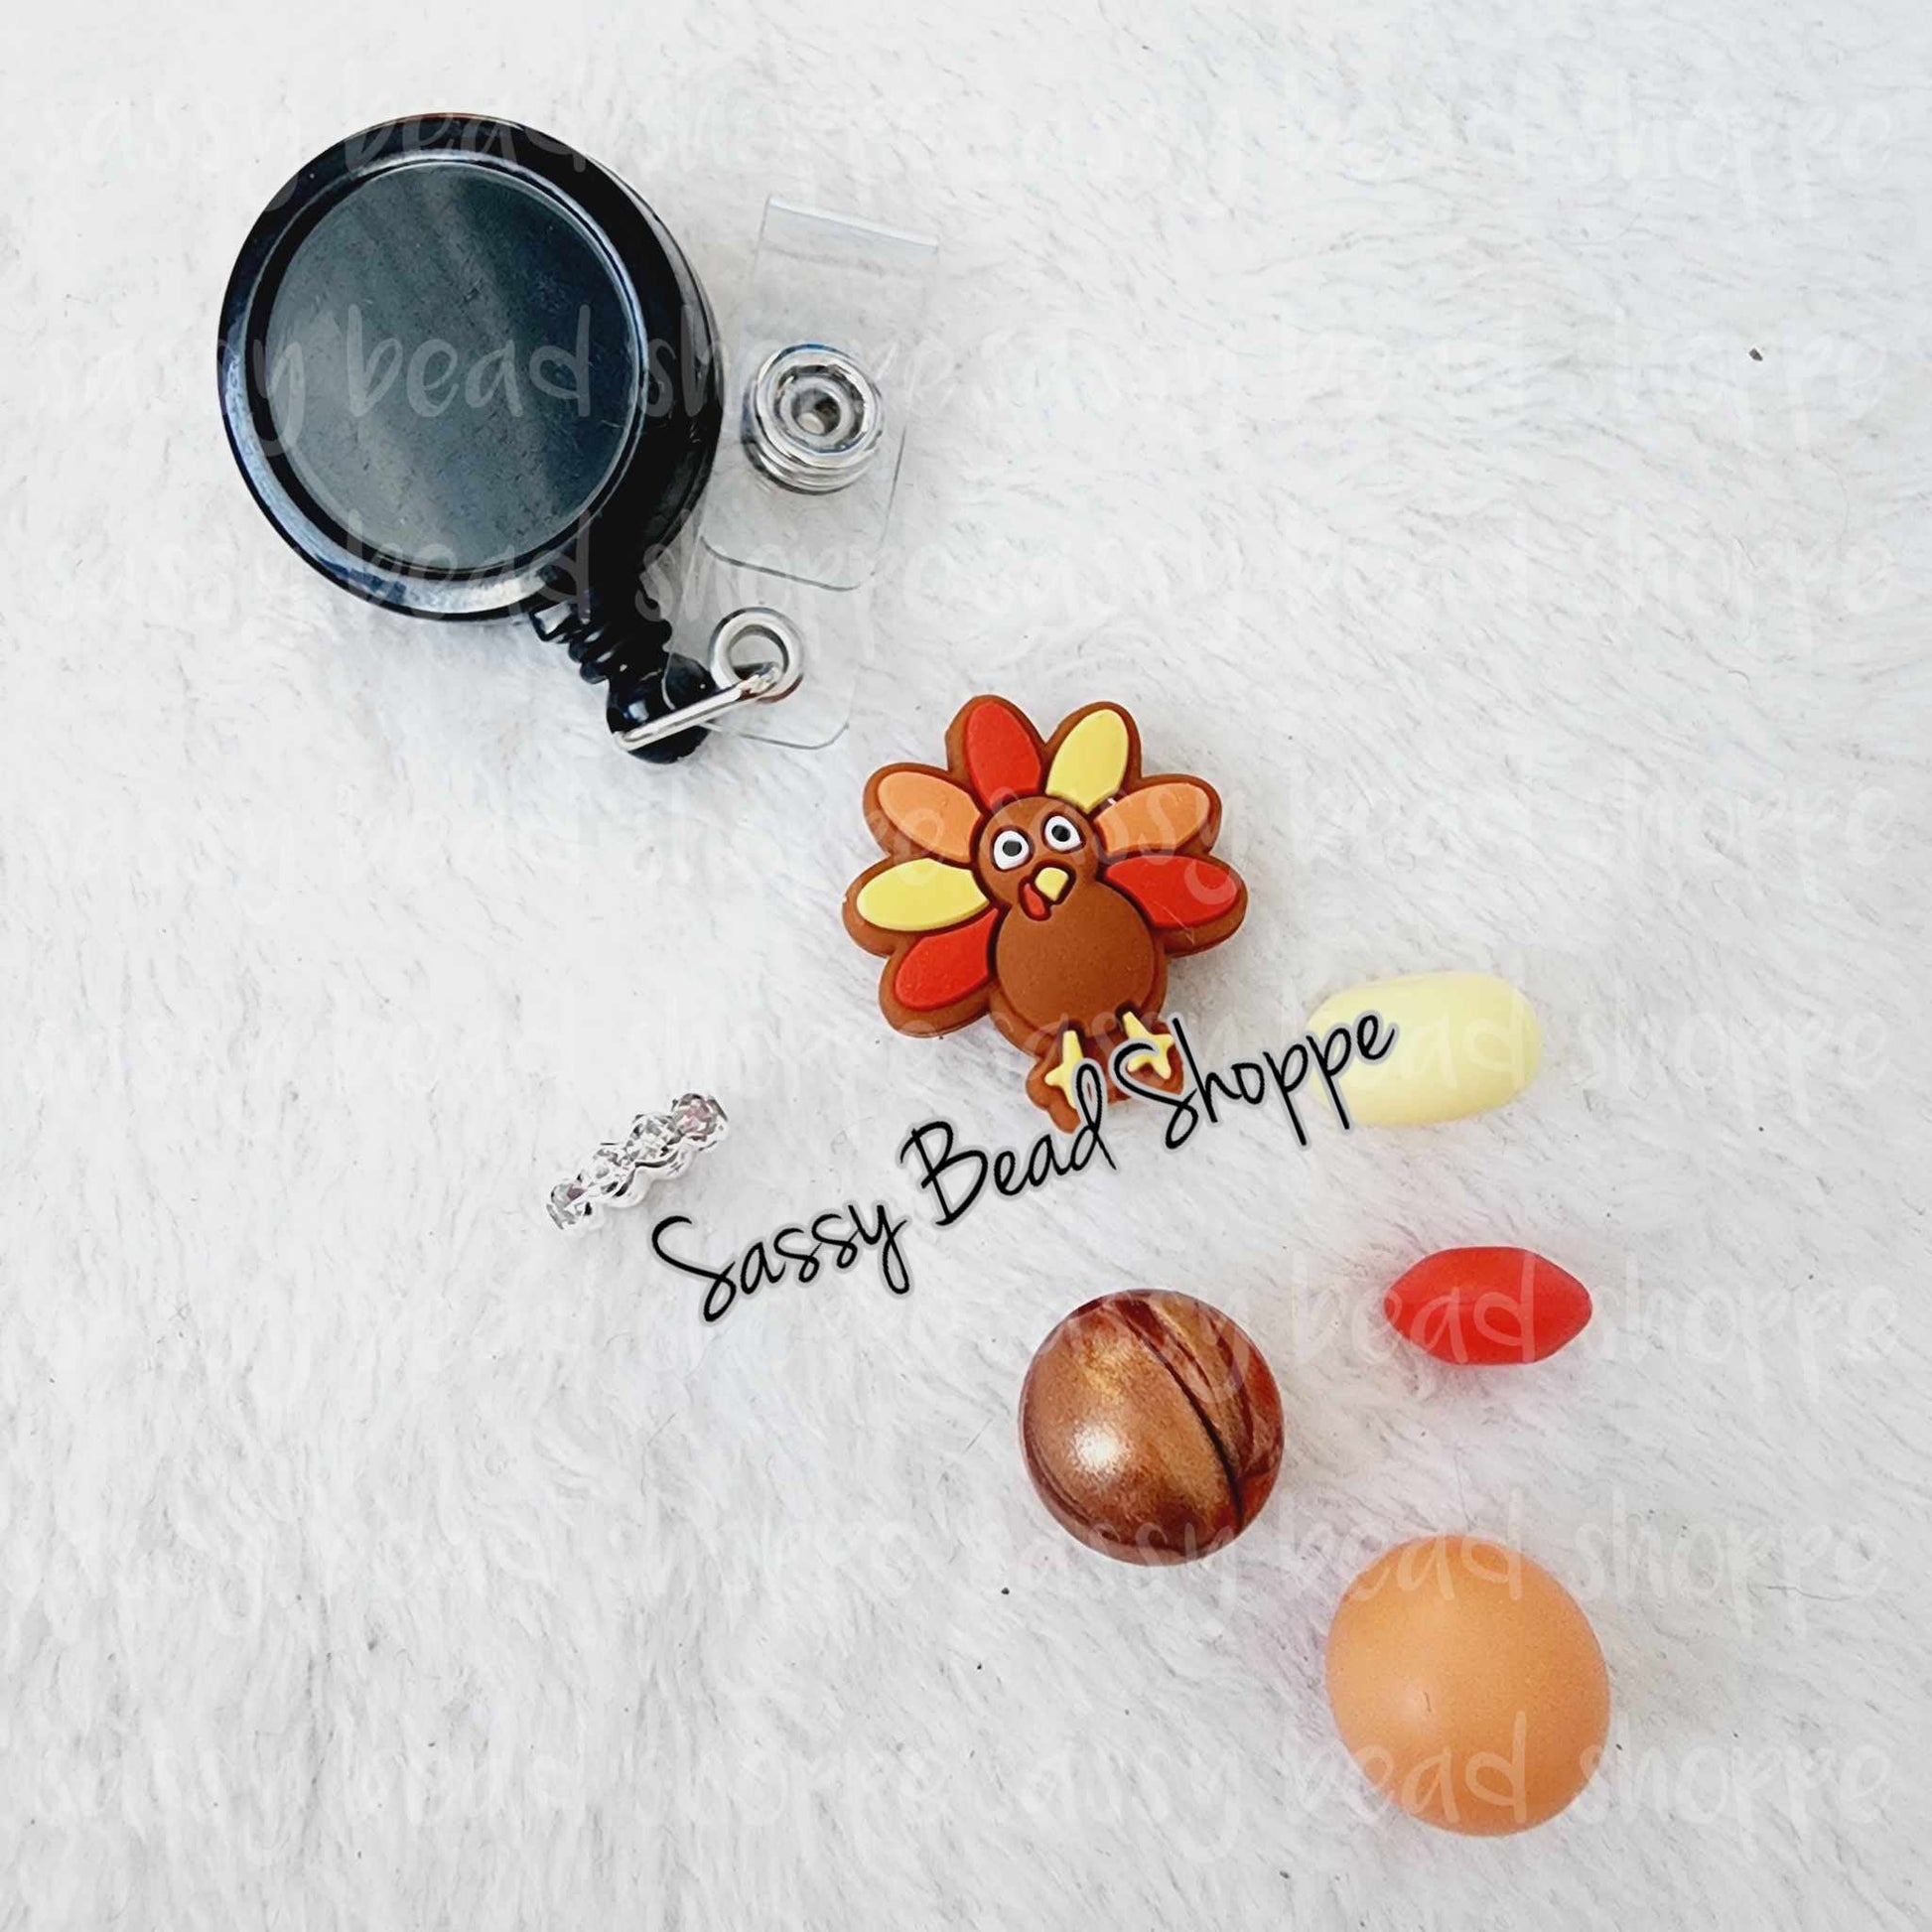 Sassy Bead Shoppe Be Thankful Badge Reel What you will receive in your kit